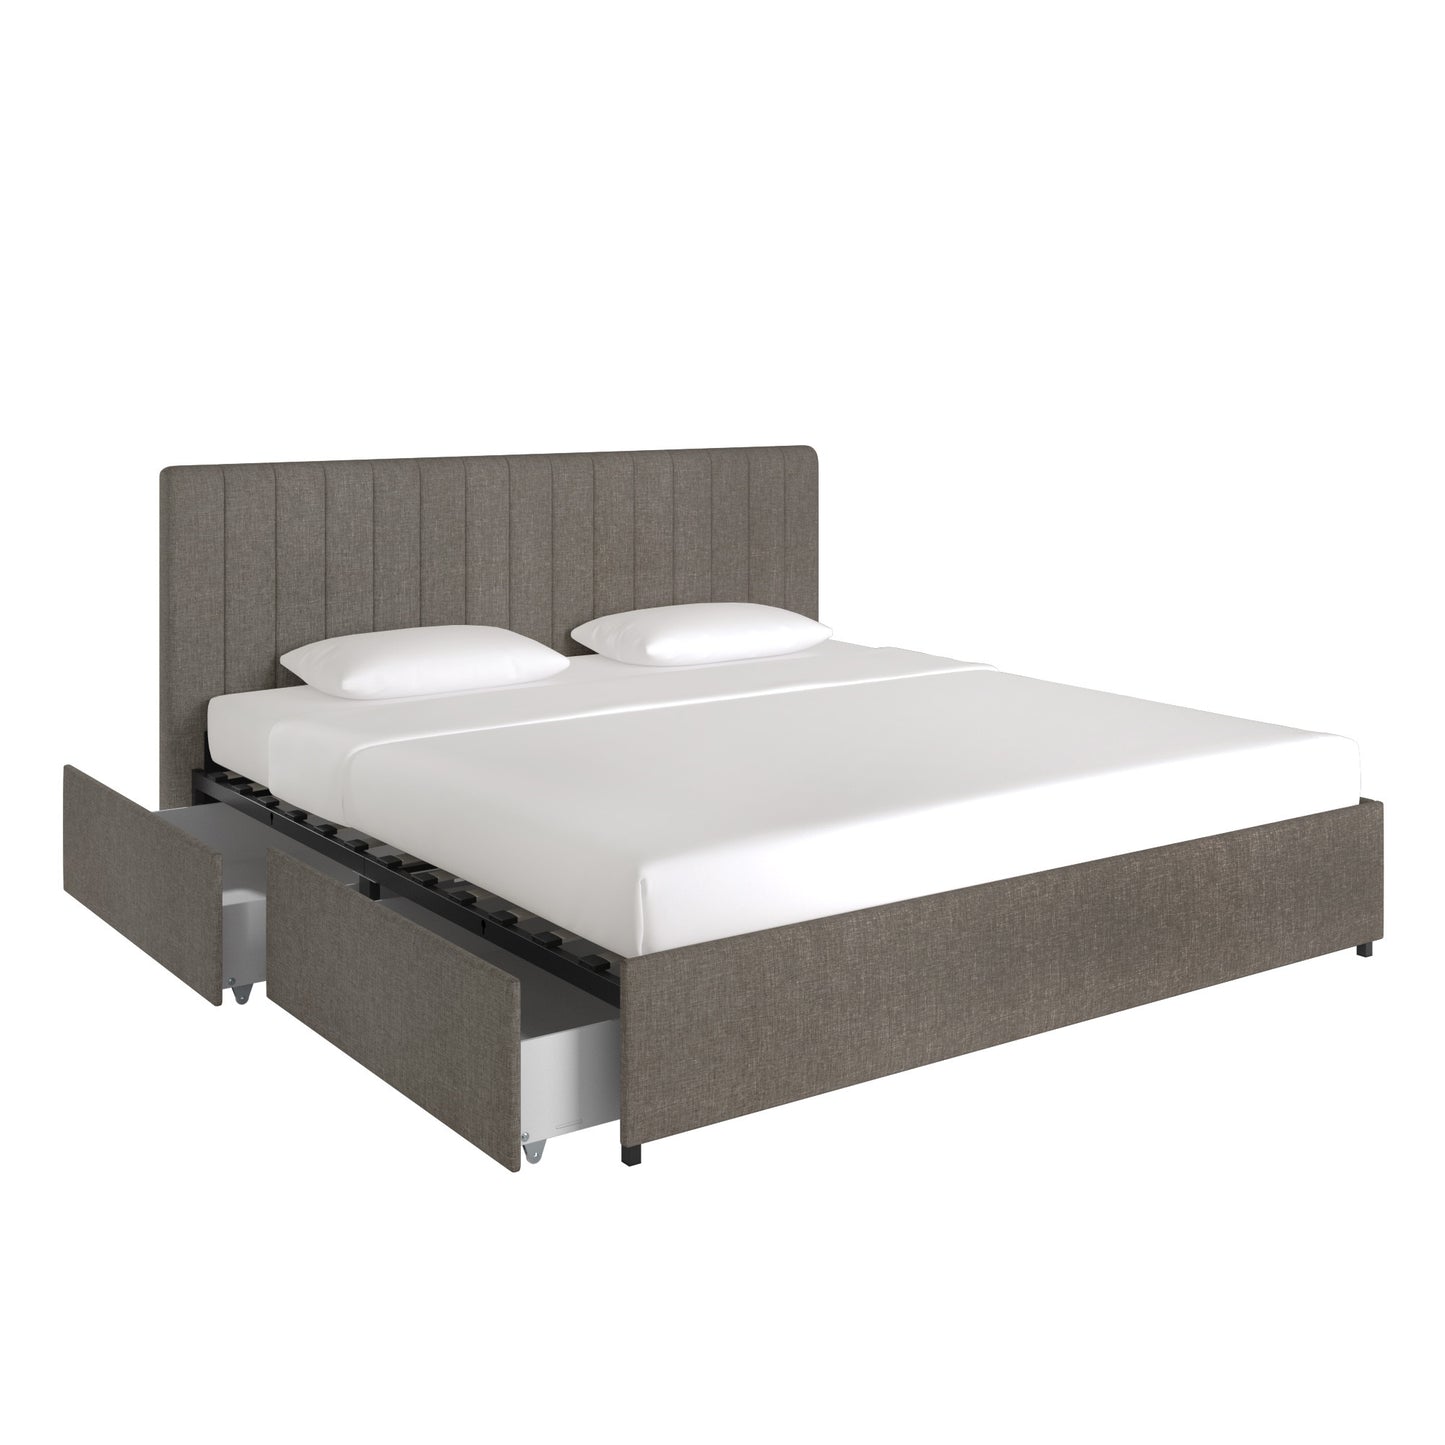 Grey Linen Upholstered Storage Platform Bed with Channel Headboard - King (King Size)